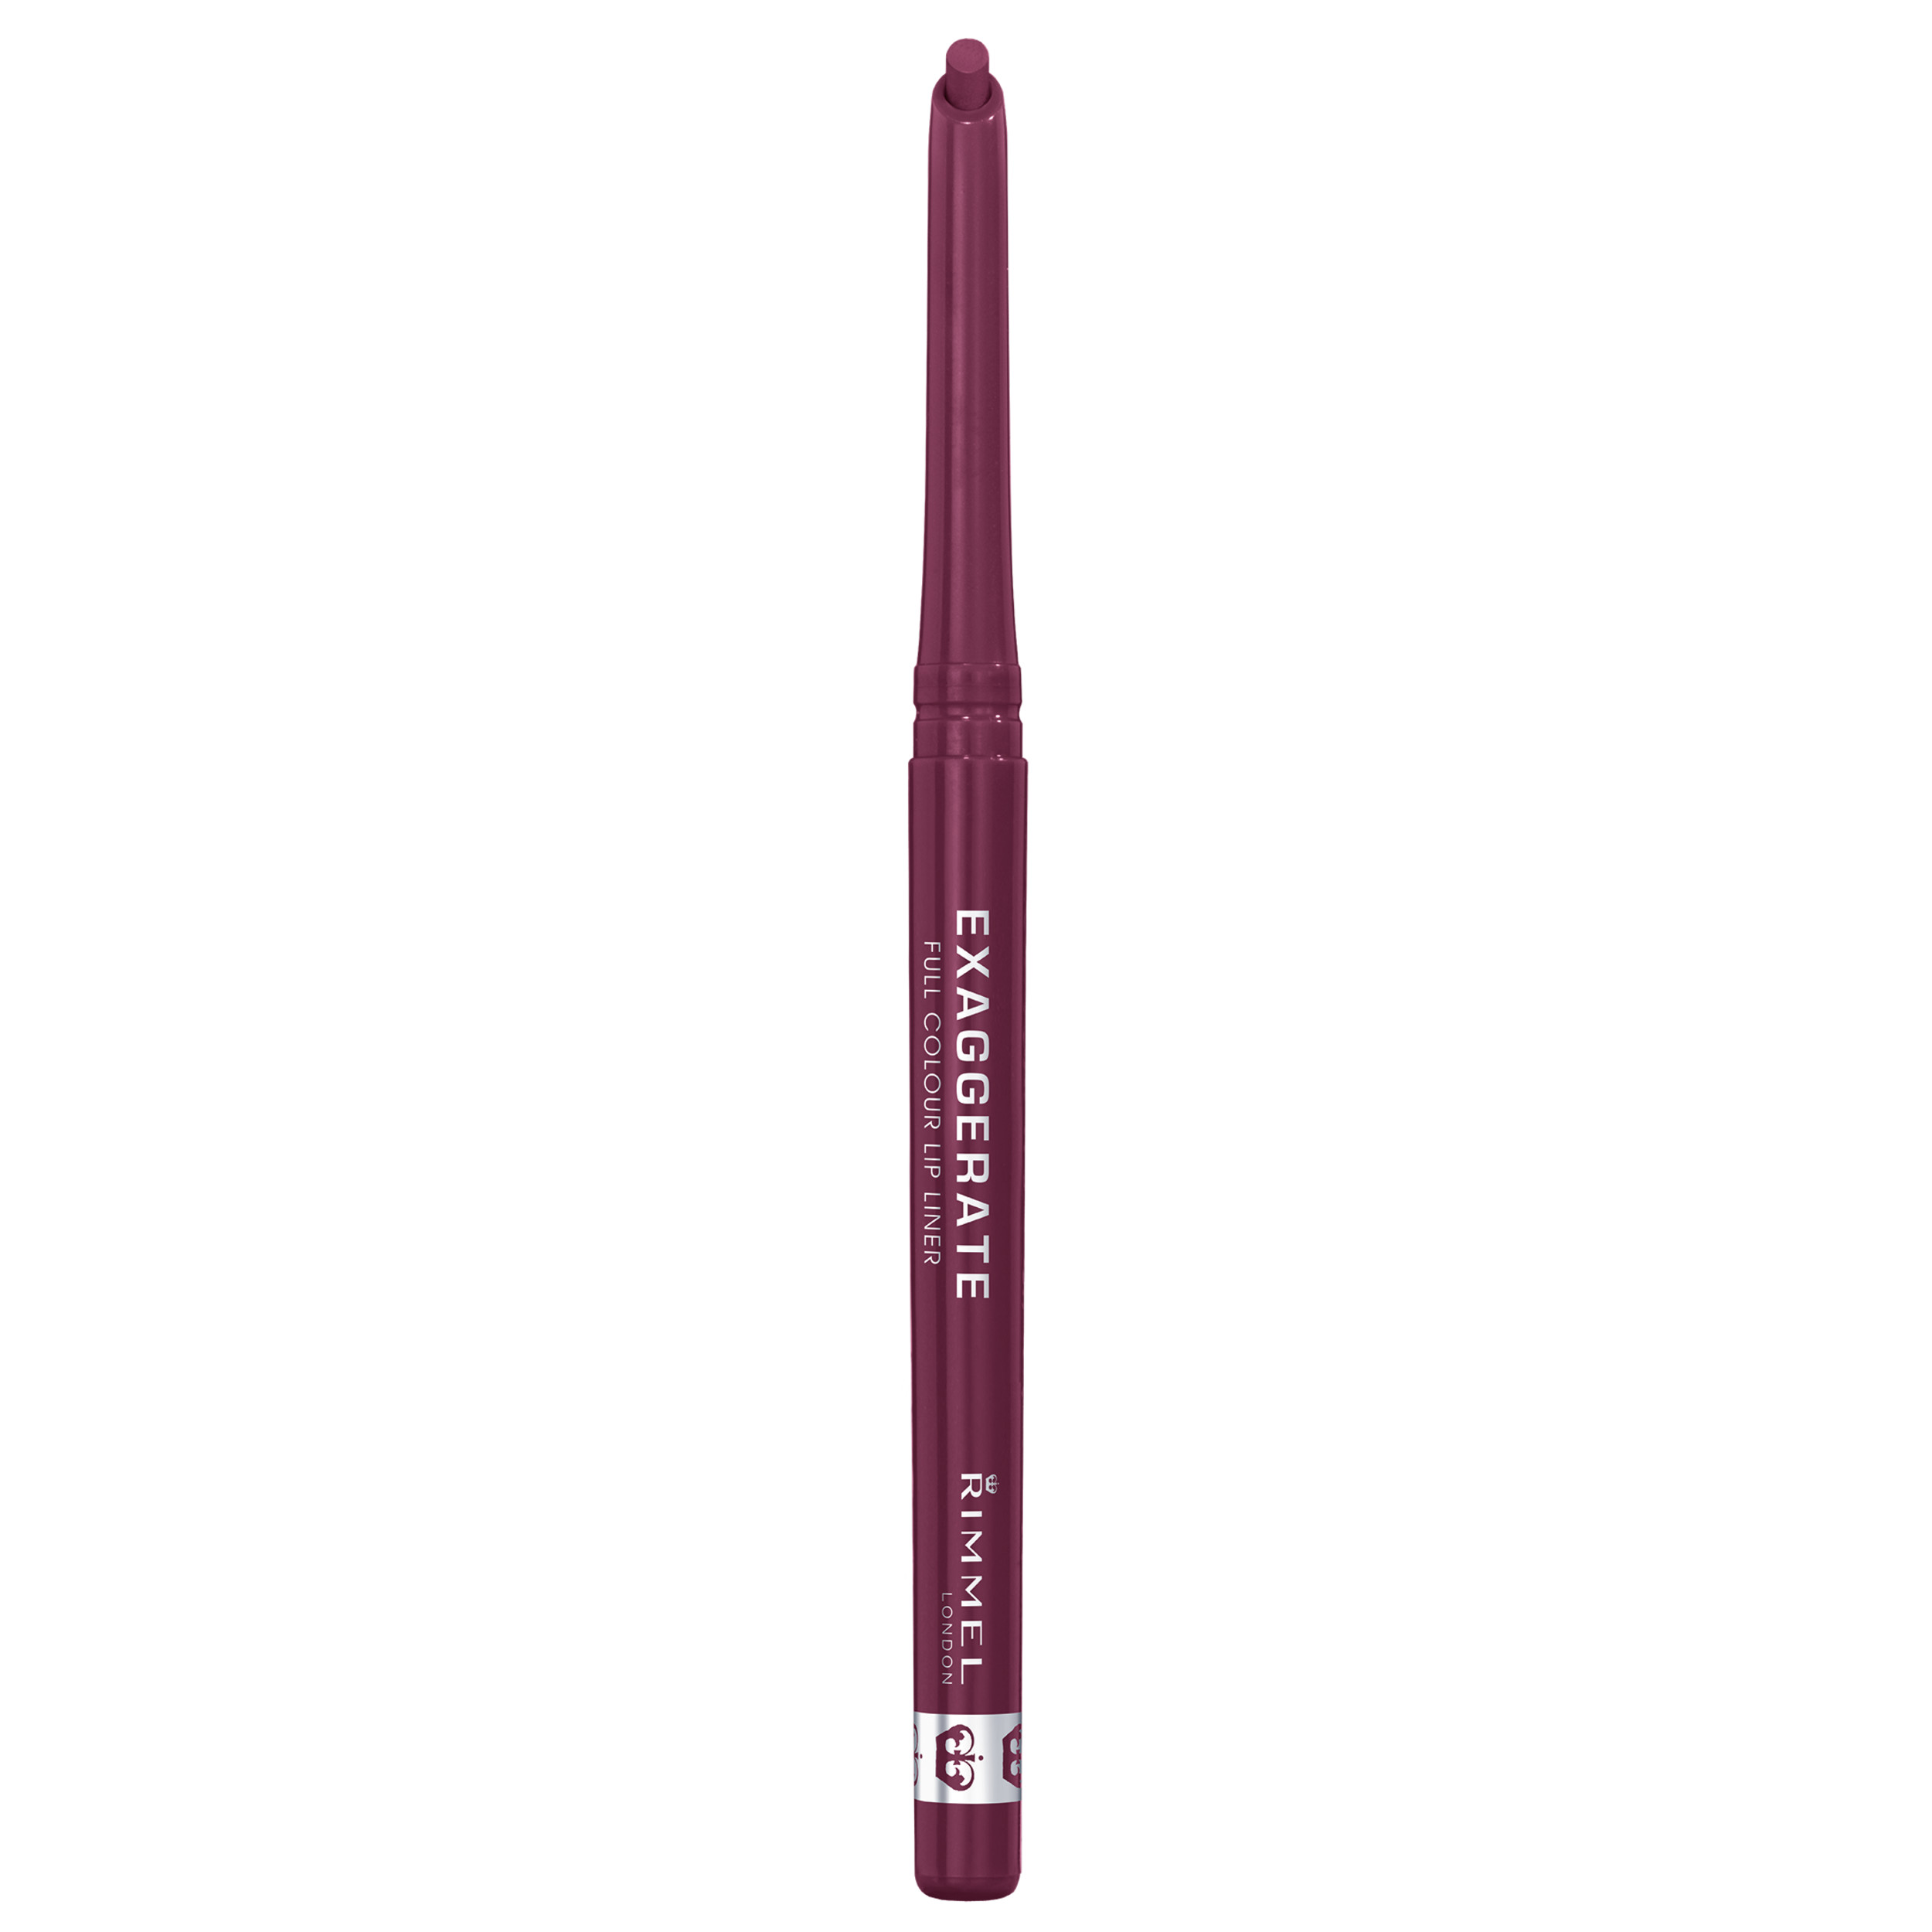 Rimmel London Exaggerate Full Colour Lip Liner, Under My Spell, 0.008 oz - image 1 of 5